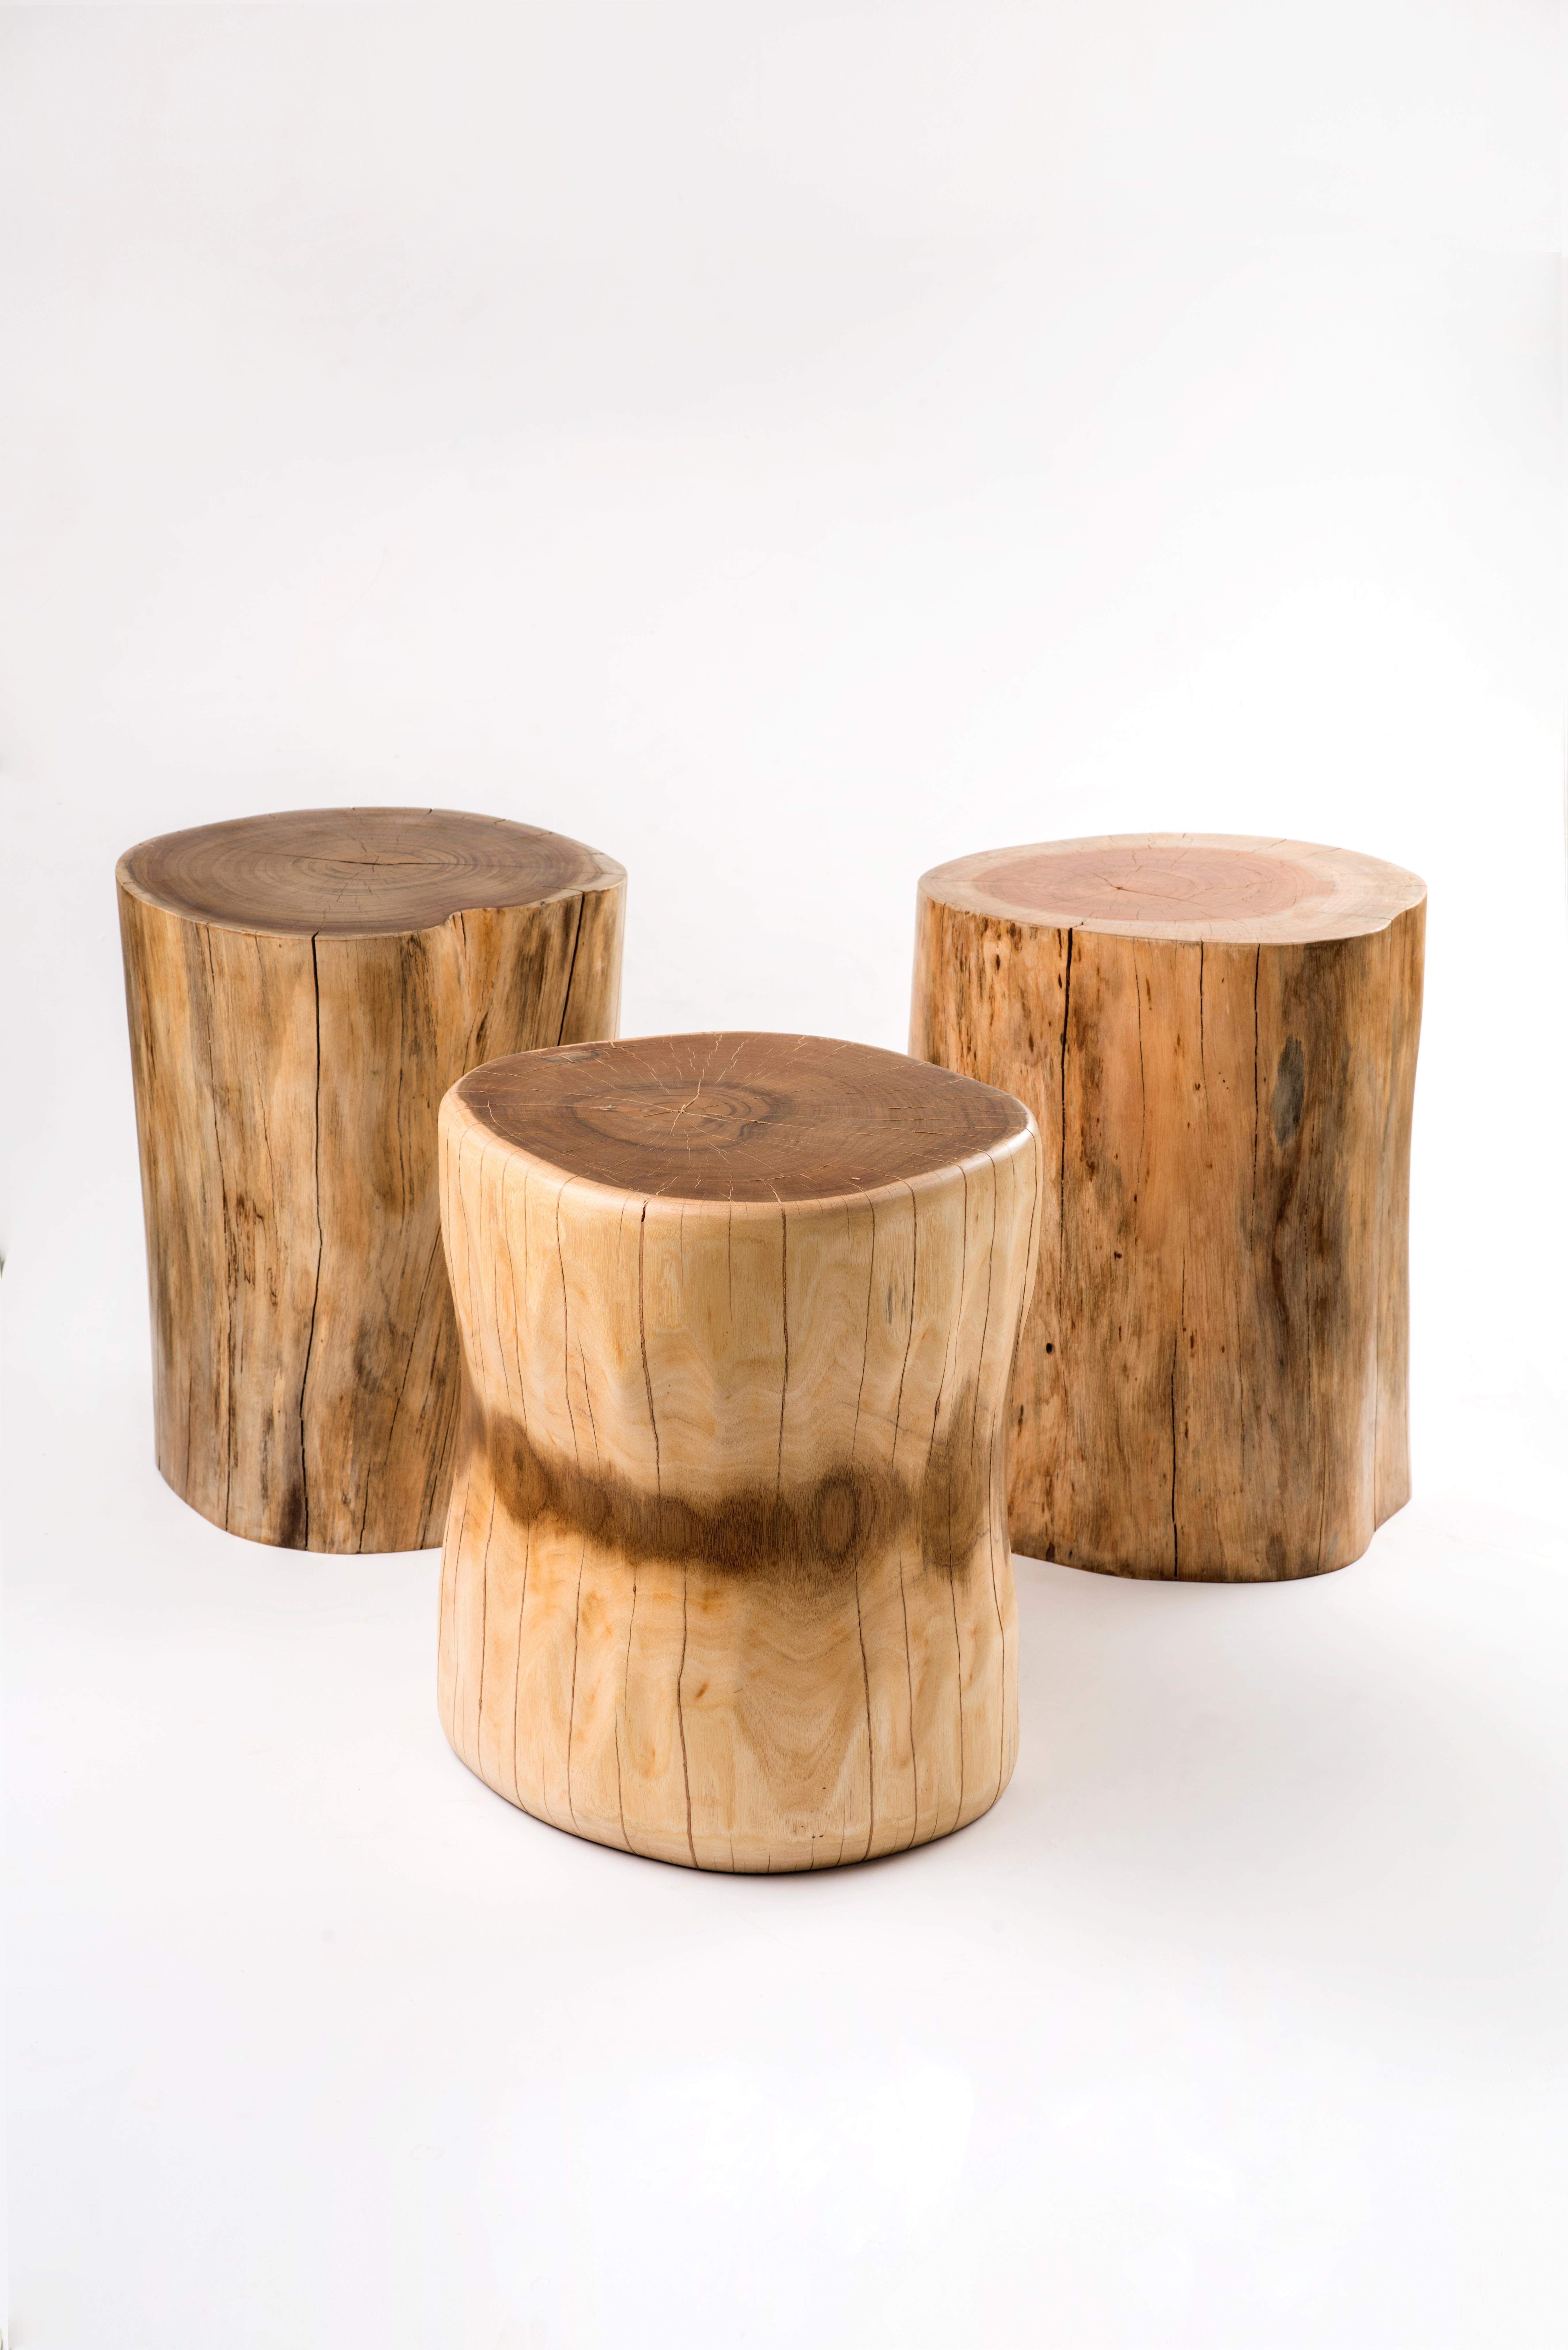 The Bone Carved Solid Wooden Stump by Kunaal Kyhaan is cut from a solid trunk of Acacia and carved in a unique bone like pattern to reveal the darker layers of the wood within, giving it an hourglass shape and a unique two tone quality.
Can be used